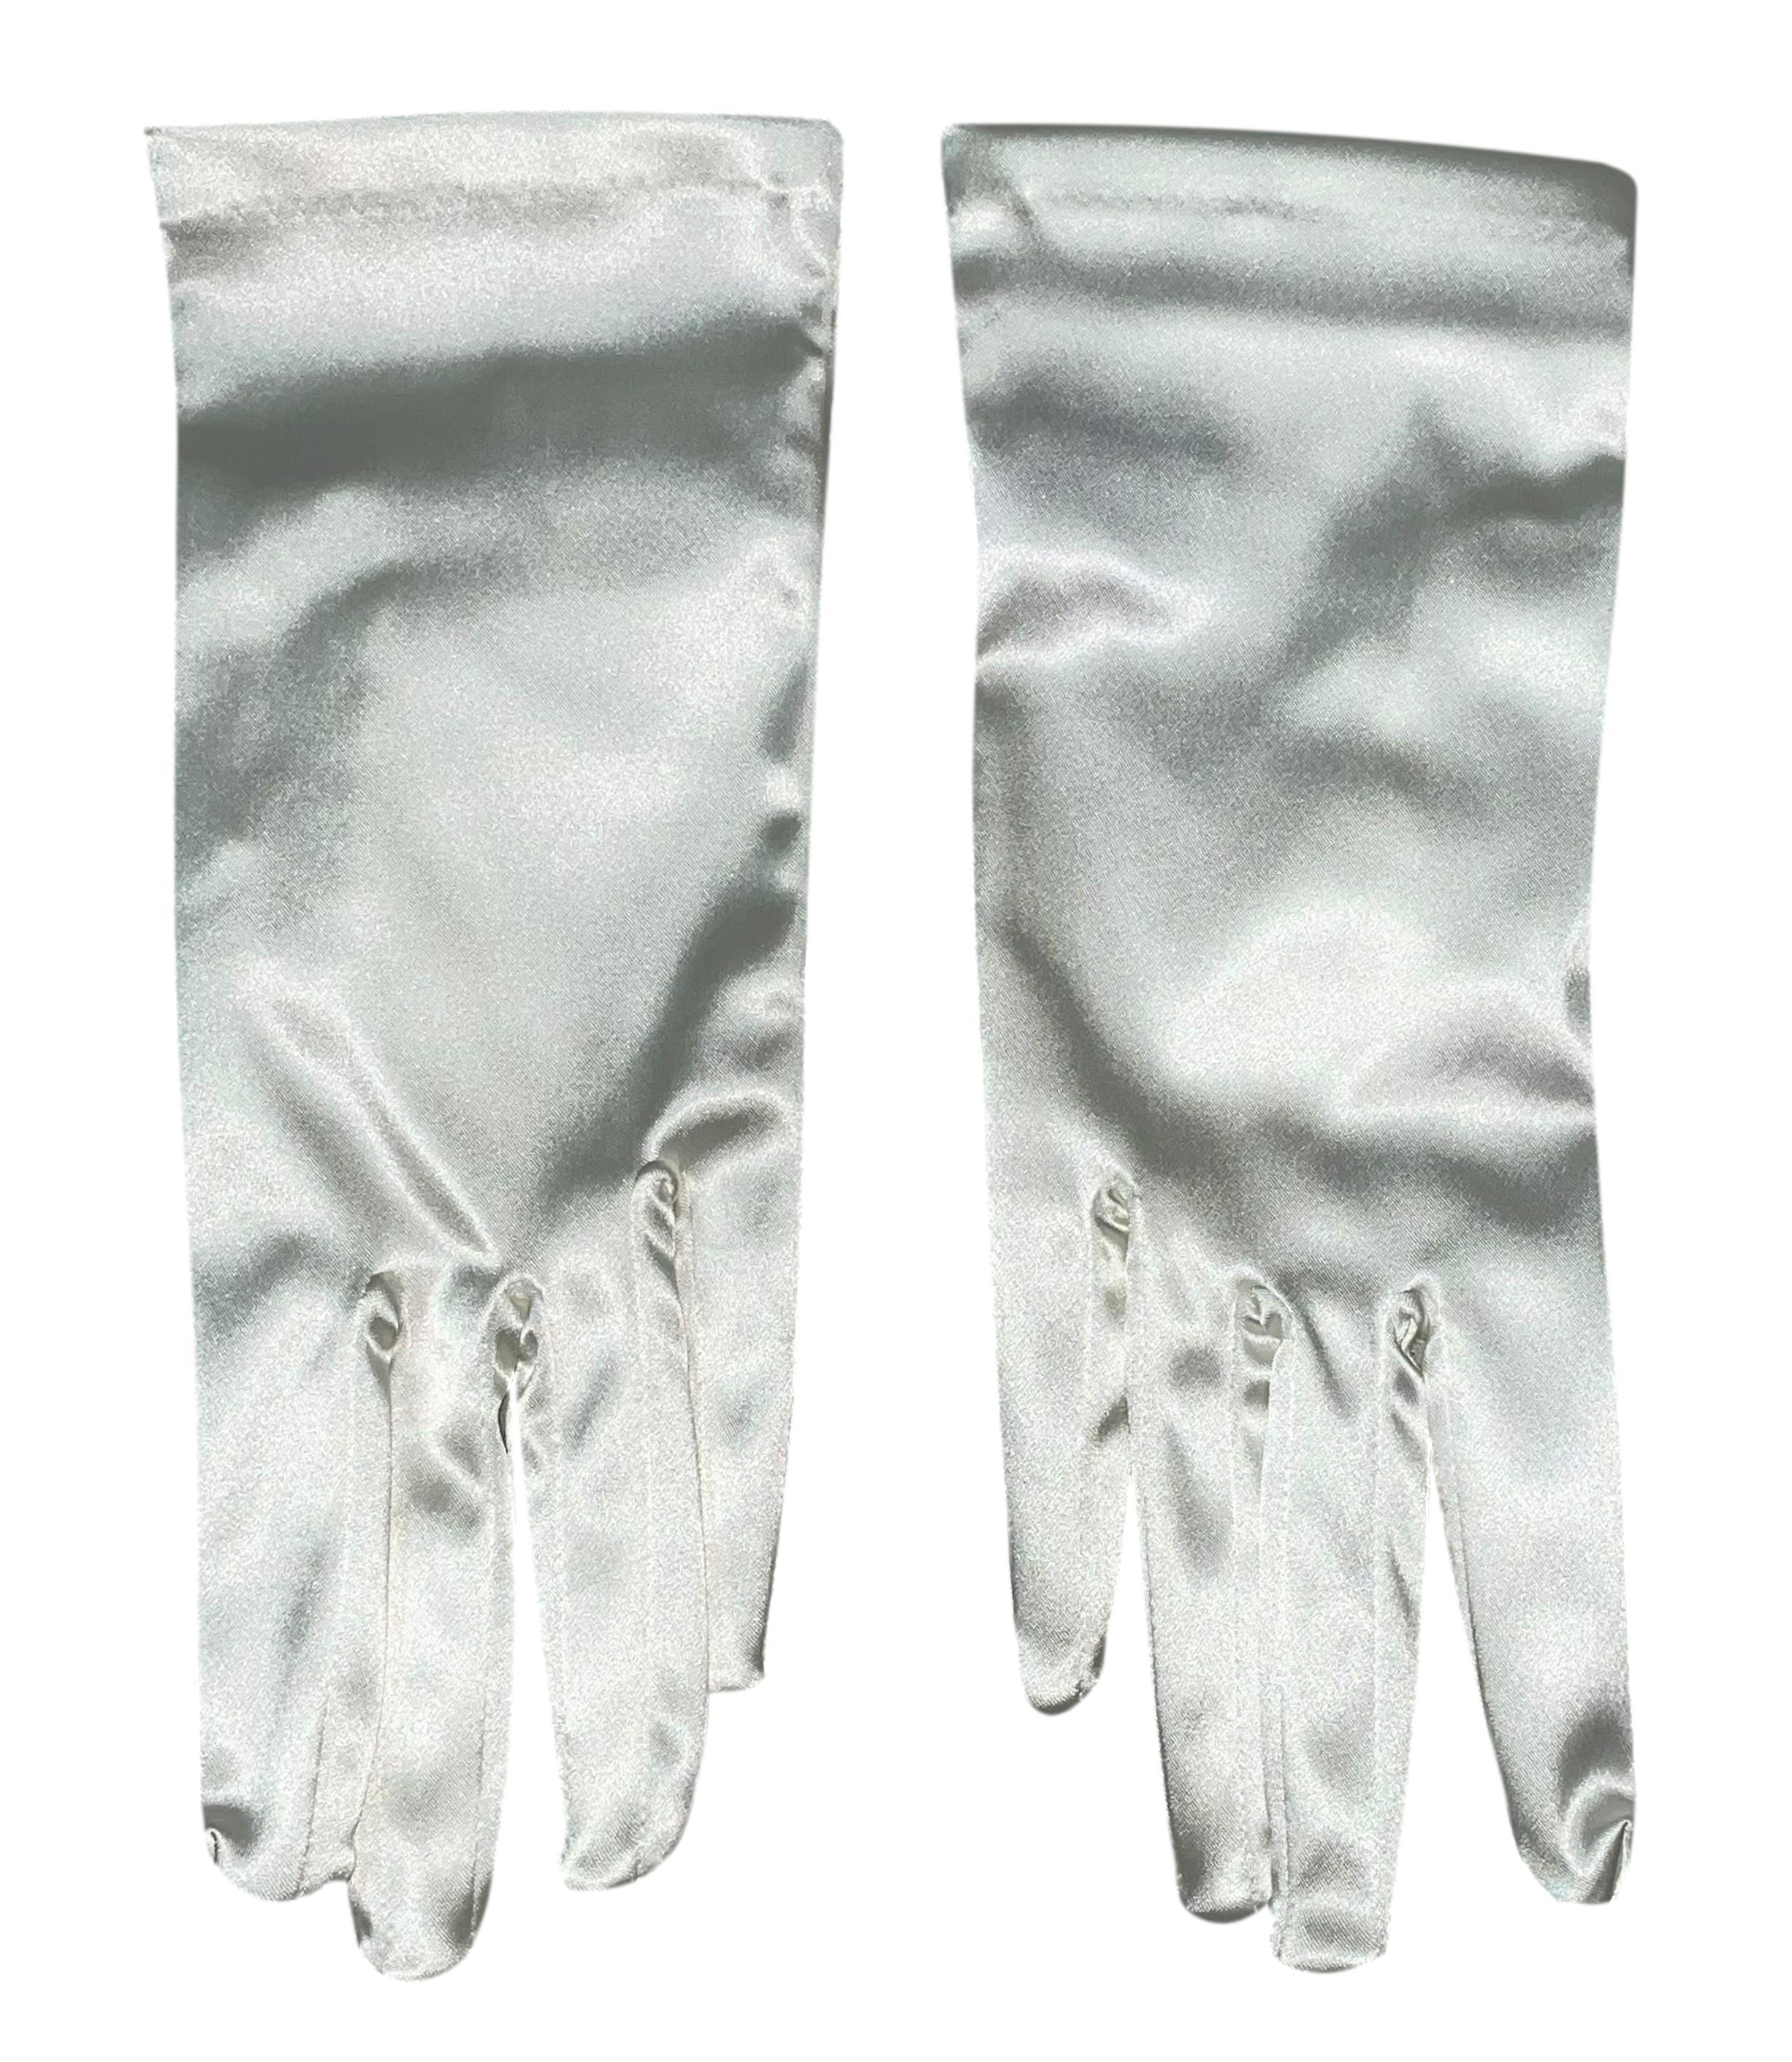 DESIGNER: 1990's Dolce & Gabbana- 2 pair of gloves, 1 short and 1 long

Please contact us for more images and/or information.

CONDITION: Unworn comes with tags and boxes

FABRIC: Acetate-Nylon-Spandex

COUNTRY: Italy

SIZE: M but runs small! fits